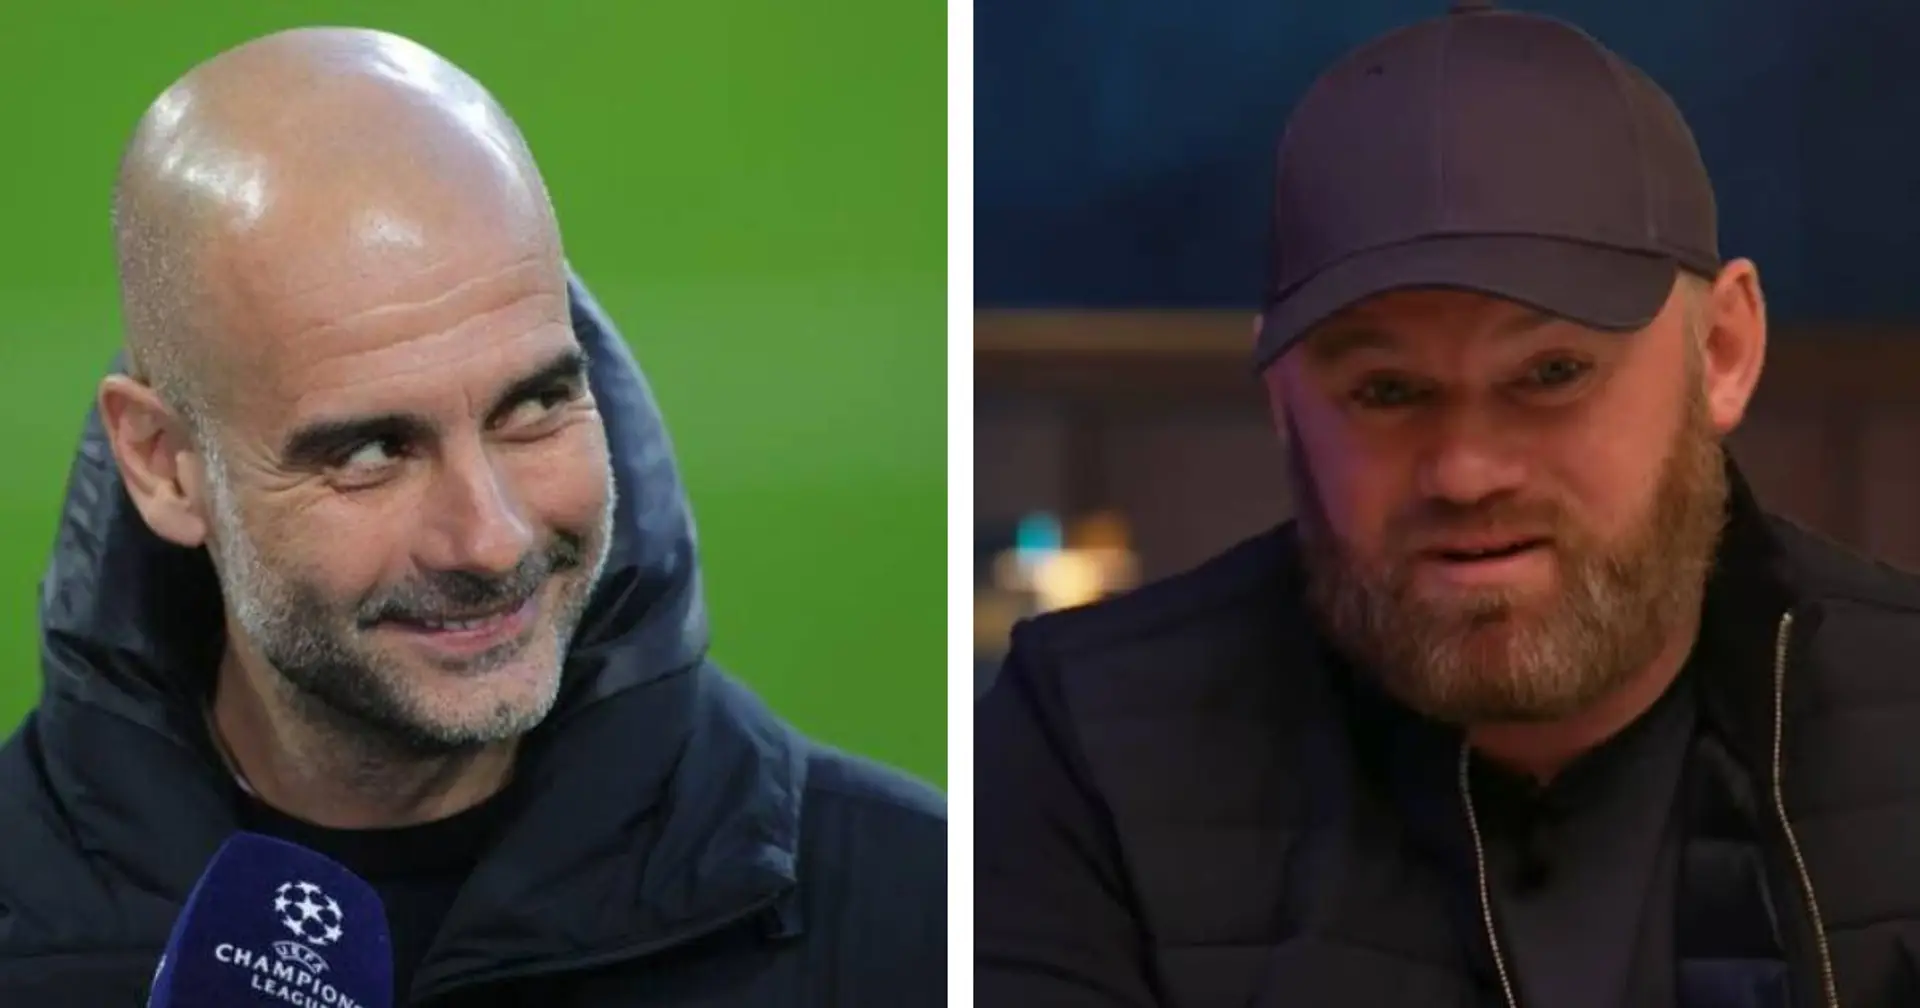 Wayne Rooney: 'If Pep Guardiola asks me to be his assistant, I’d walk to Man City'